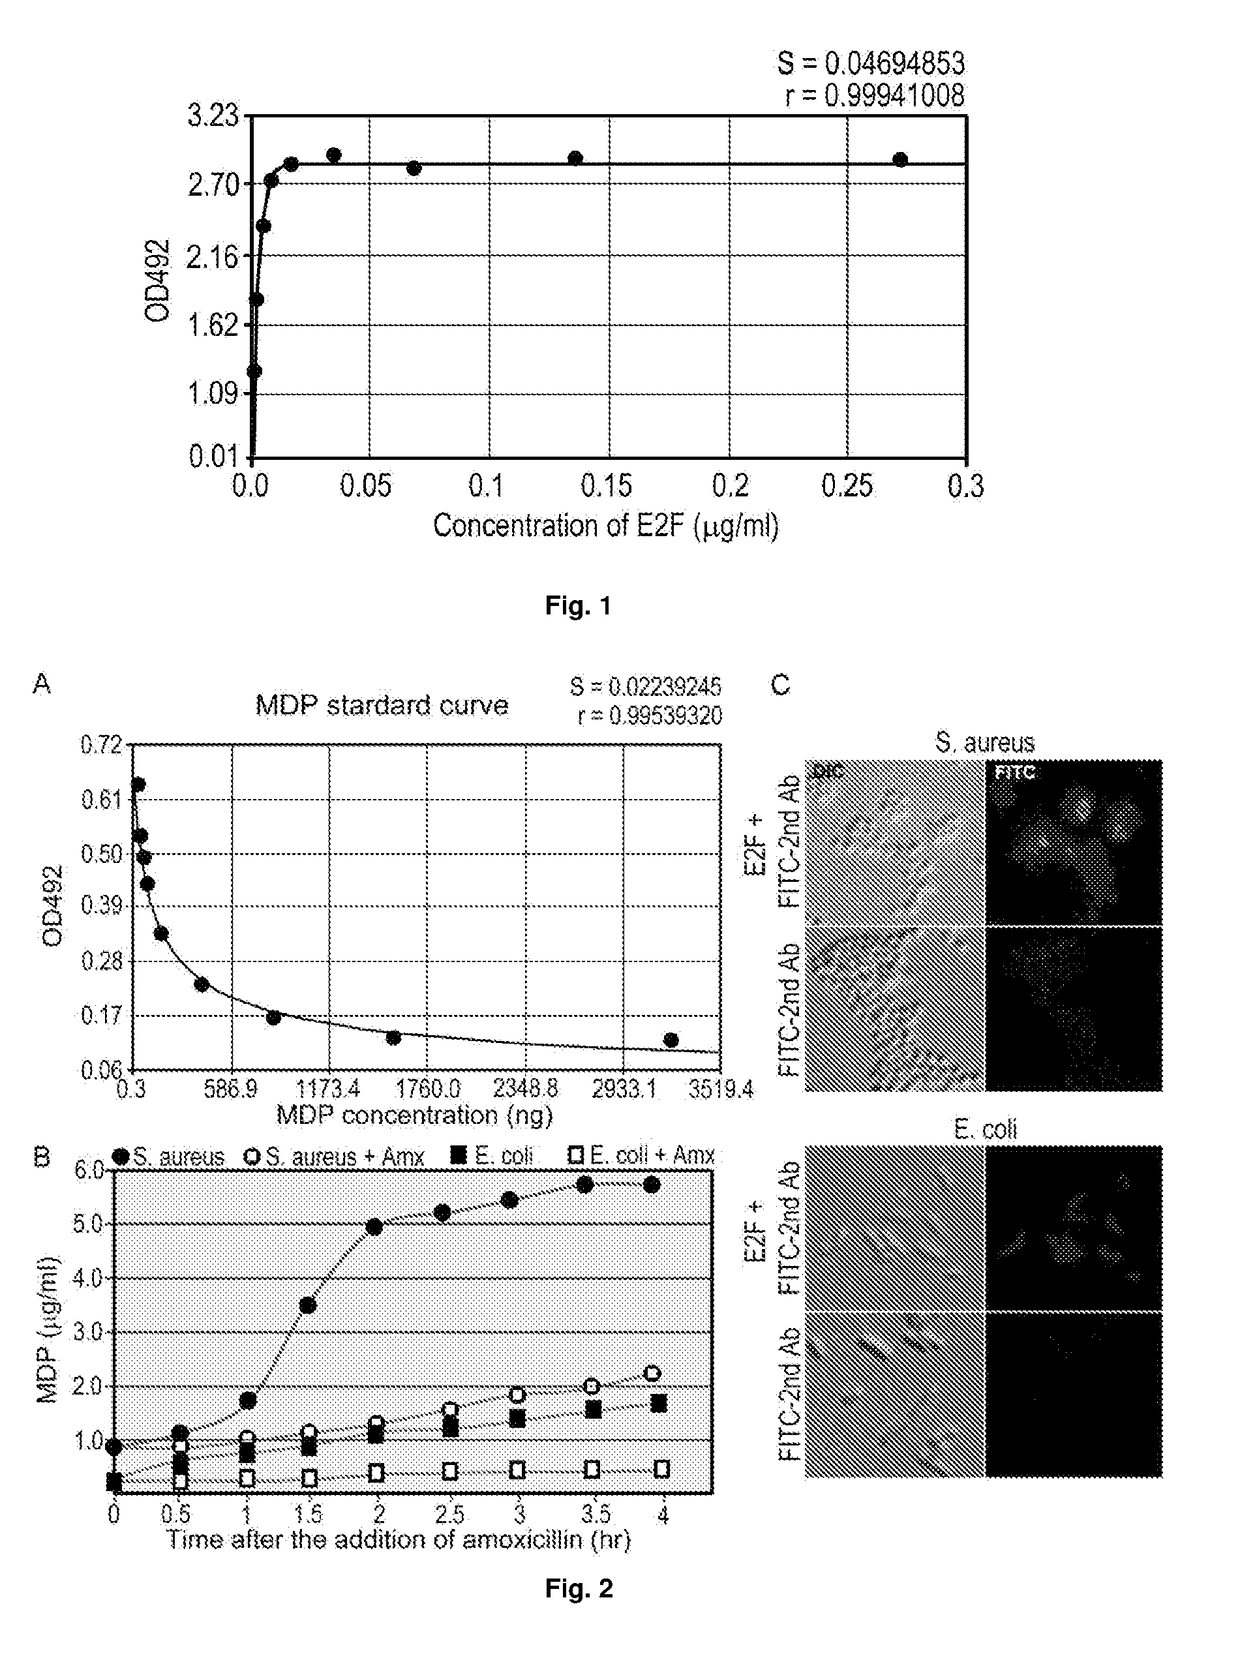 Monoclonal antibody against muramyl peptides in prevention and treatment of immune-mediated diseases